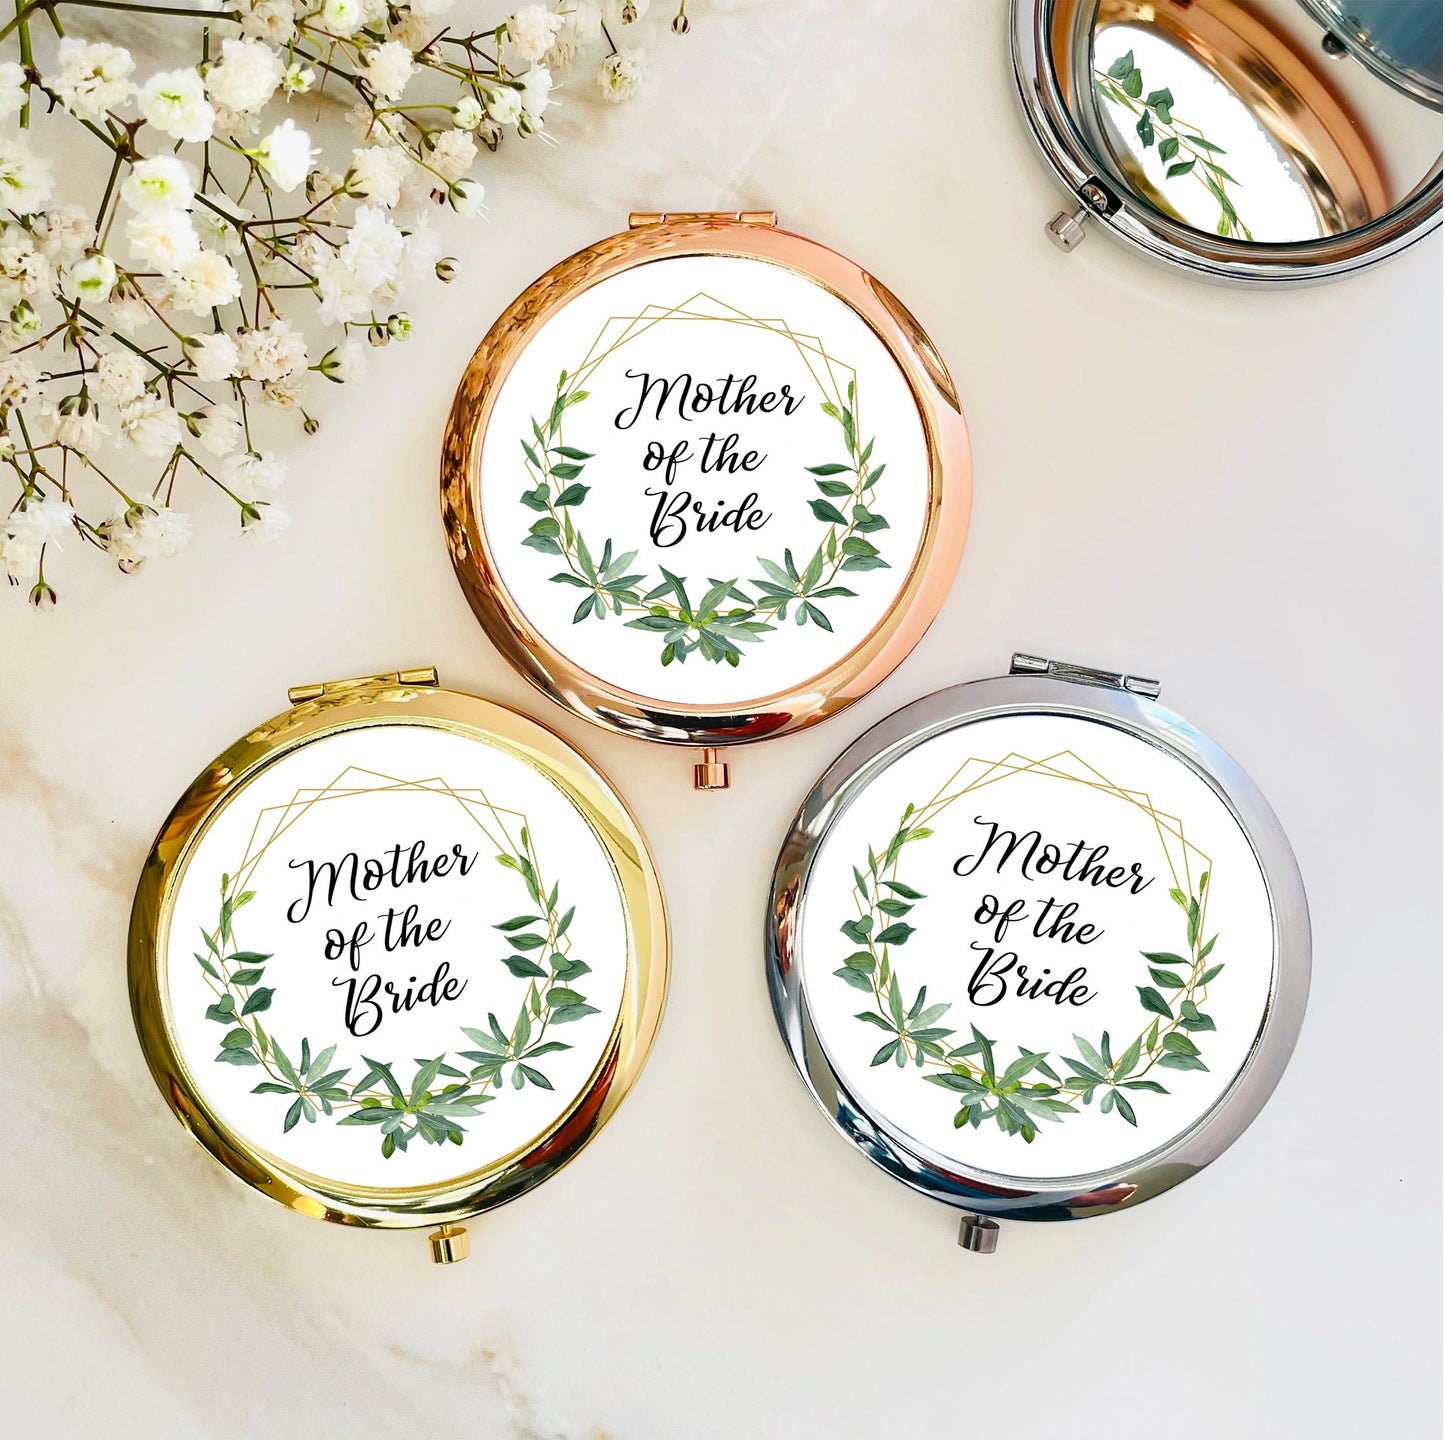 Mother of the Bride Gift Compact Mirror - Greenery